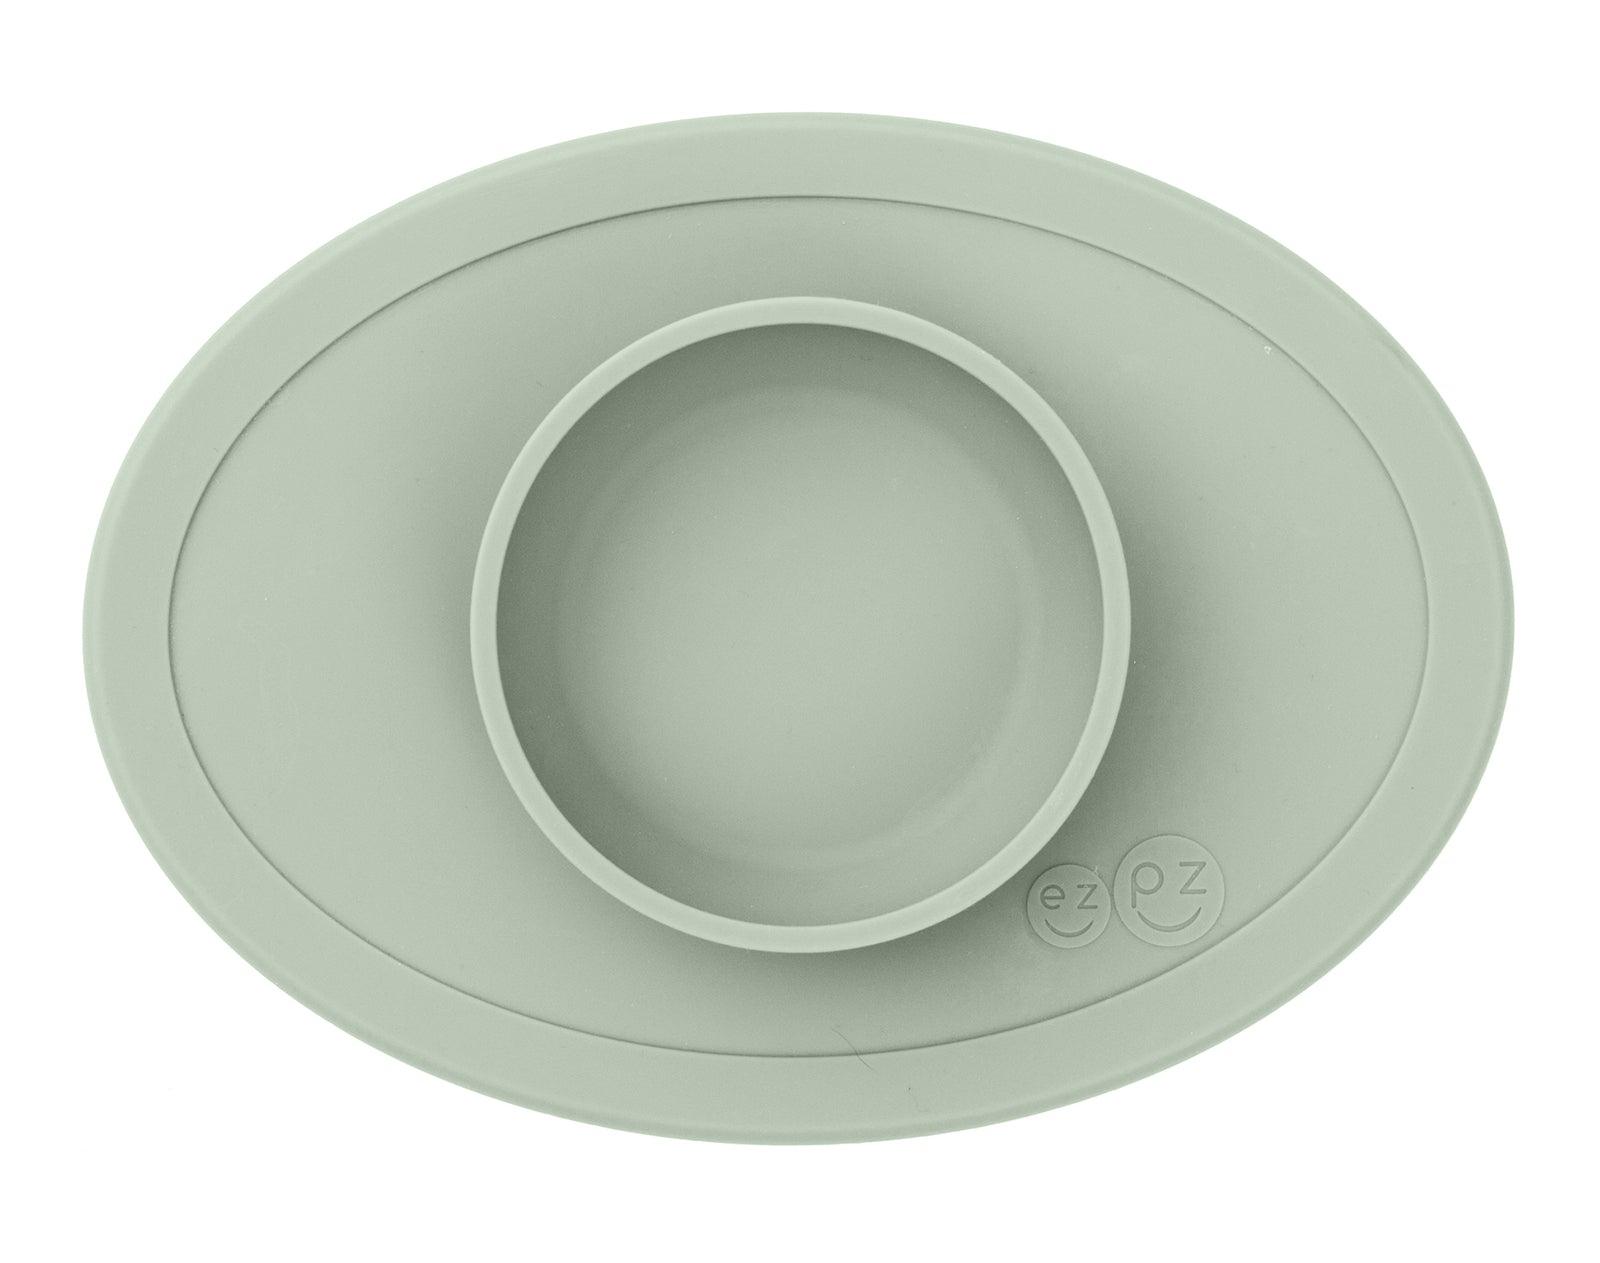 100% Silicone Suction Placemat and bowl ezpz Tiny Bowl GRAY 